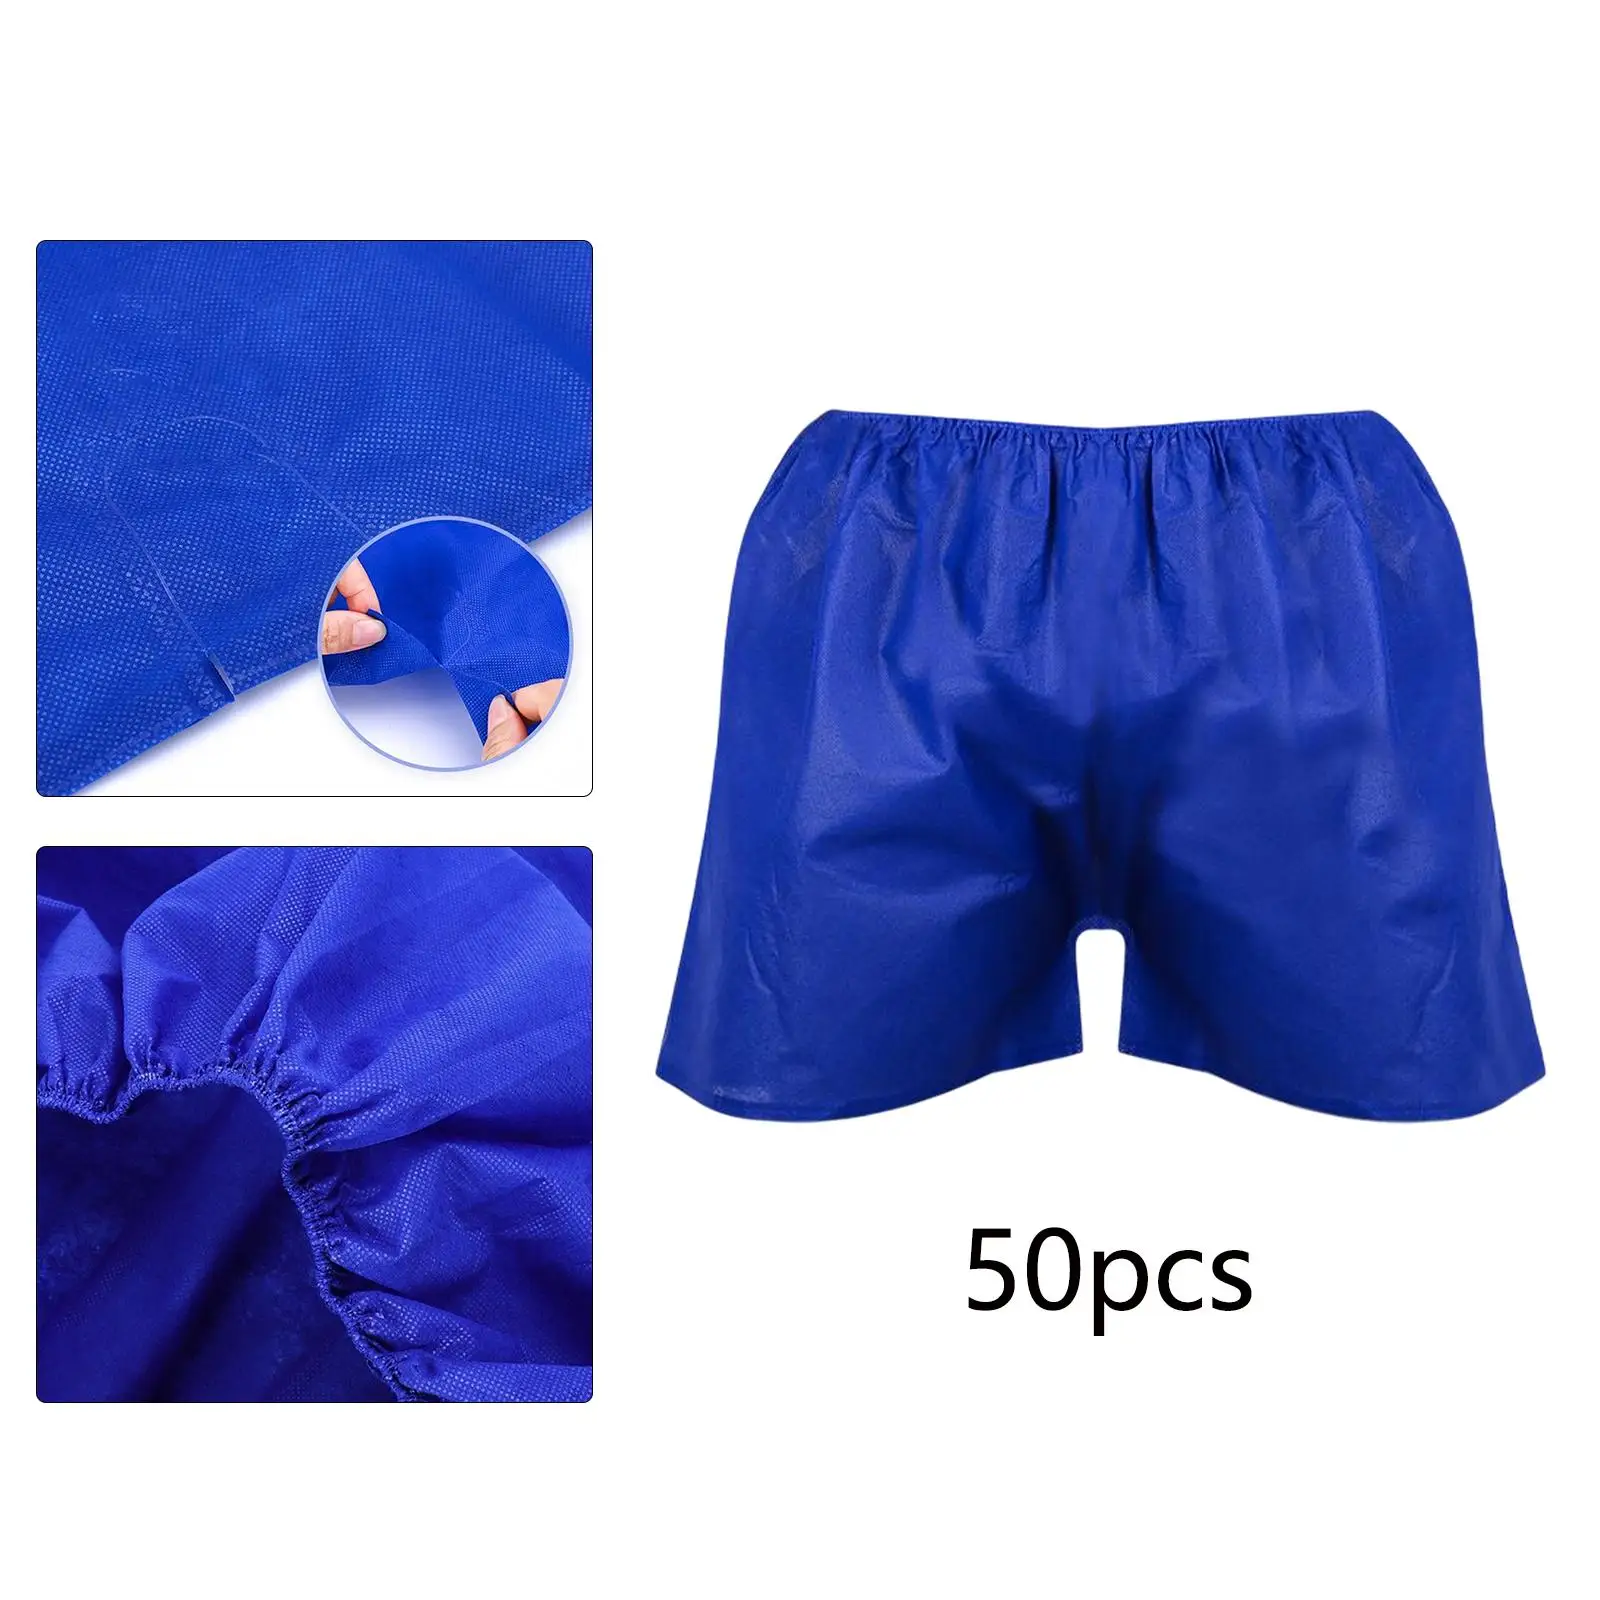 Men`s Boxer Shorts Adjustable Panties Underwear for Male Sauna Steaming Home